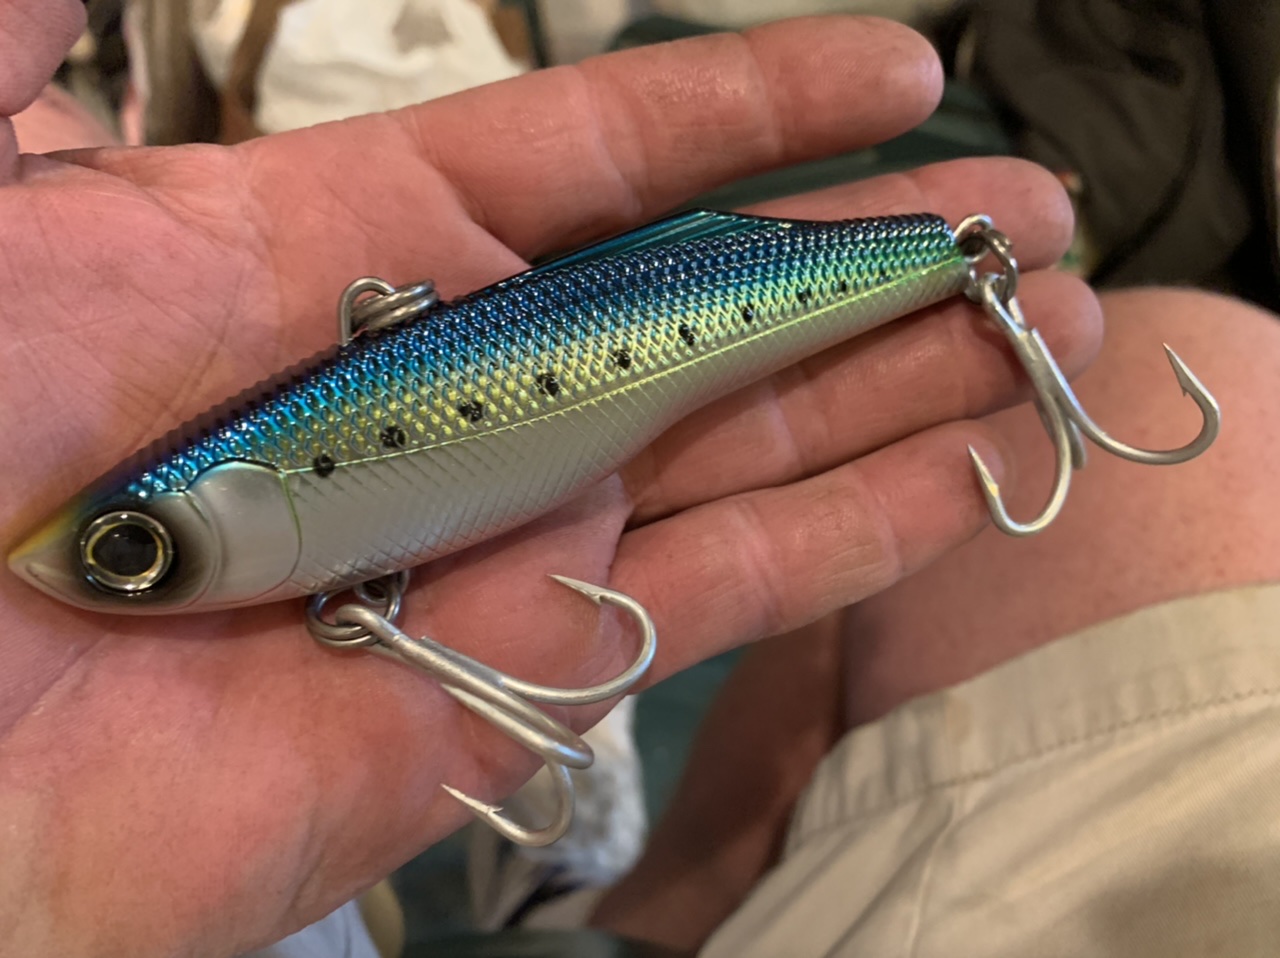 Blade baits – Which ones??? - General Discussion Forum - General